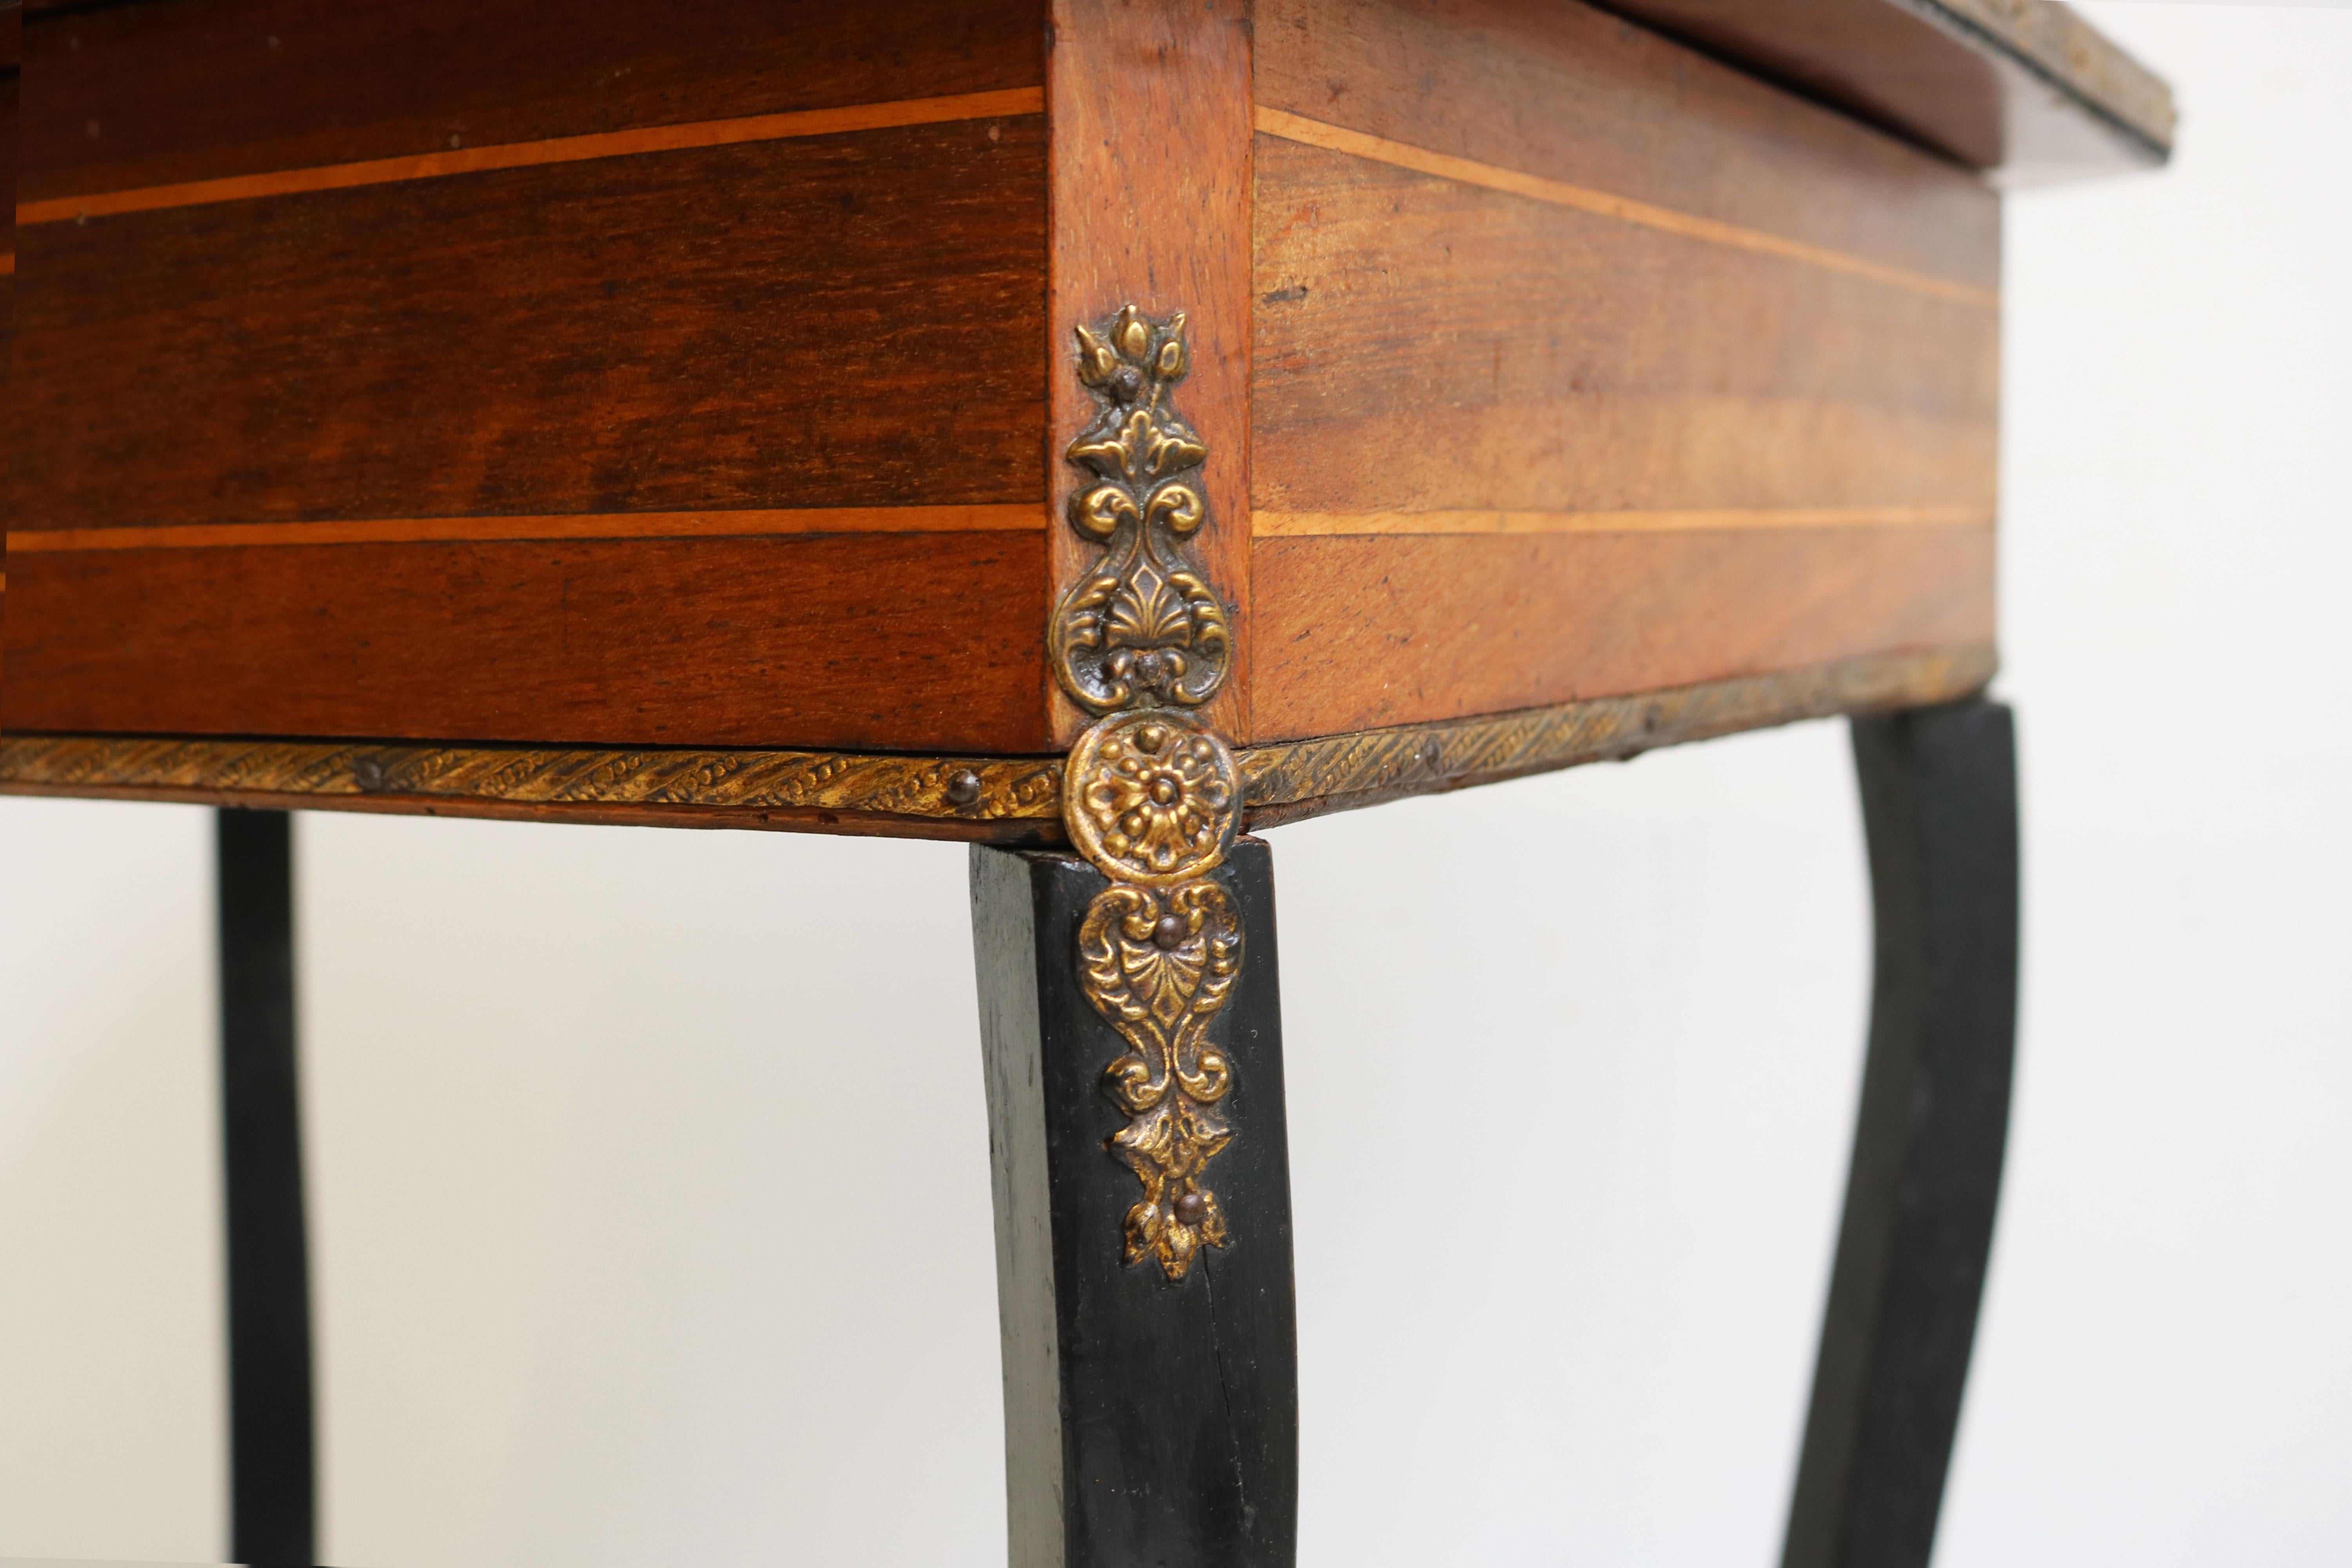 Copper Antique French Inlaid Napoleon III Side Table / Vanity 19th Century Marquetry For Sale